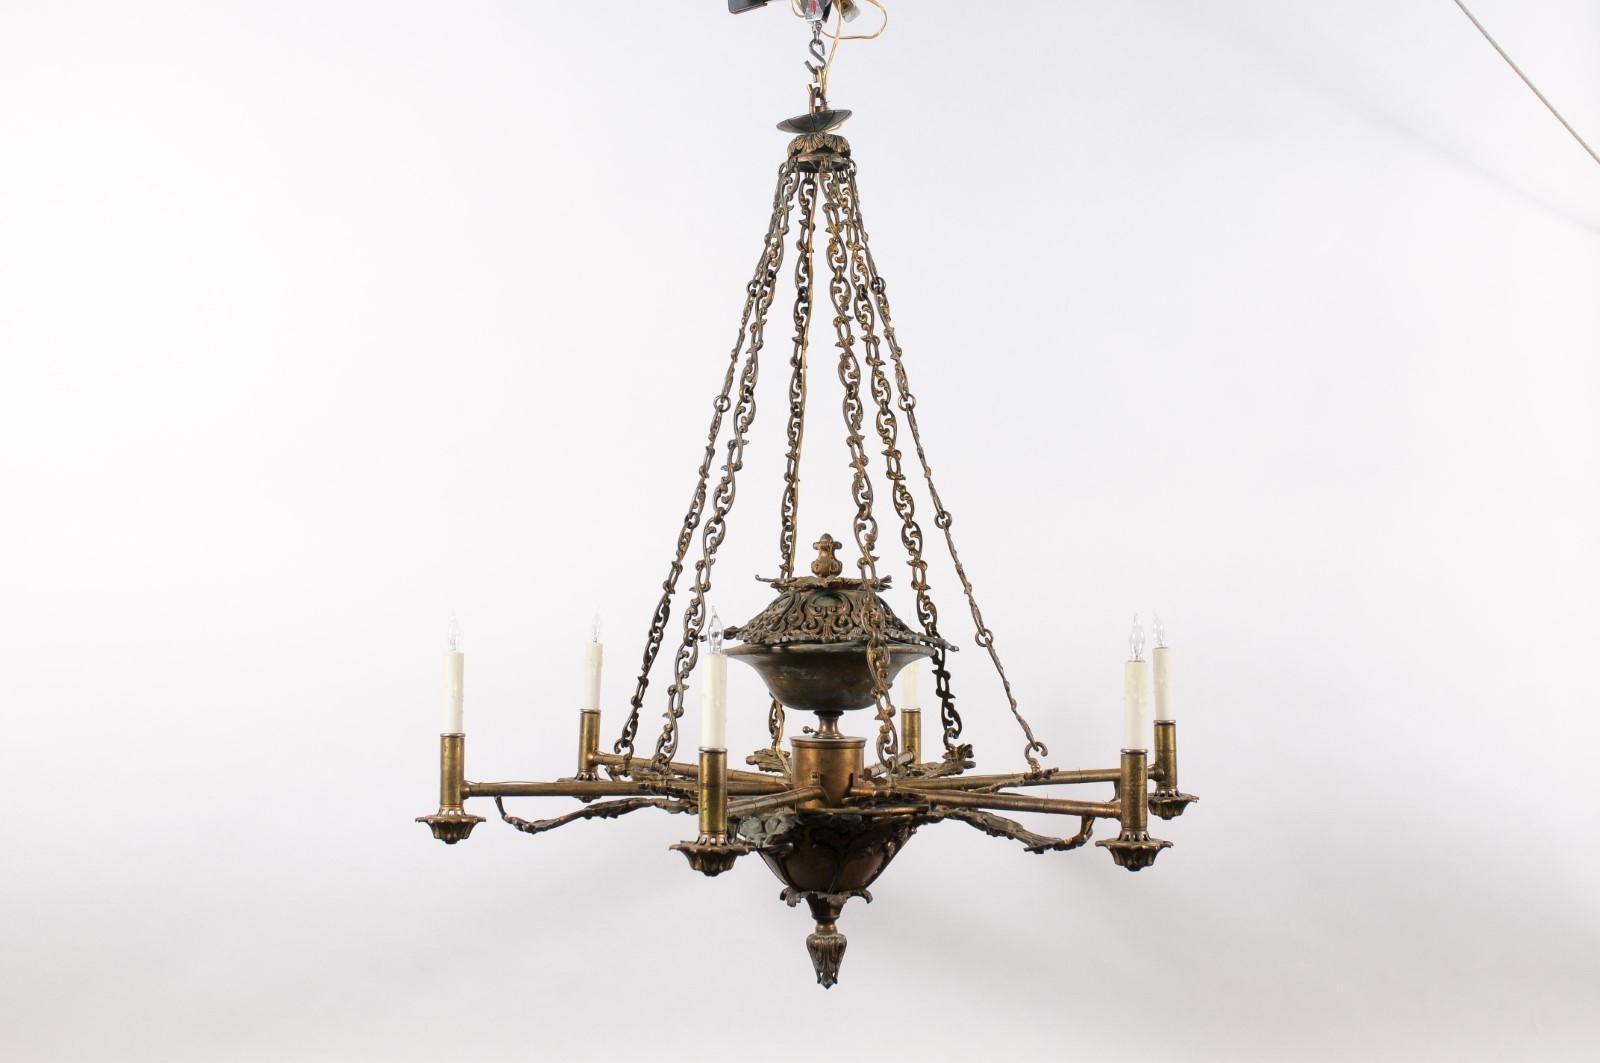  Italian Mid 19th Century Bronze Chandelier with Foliage Detail and 6 Lites For Sale 7